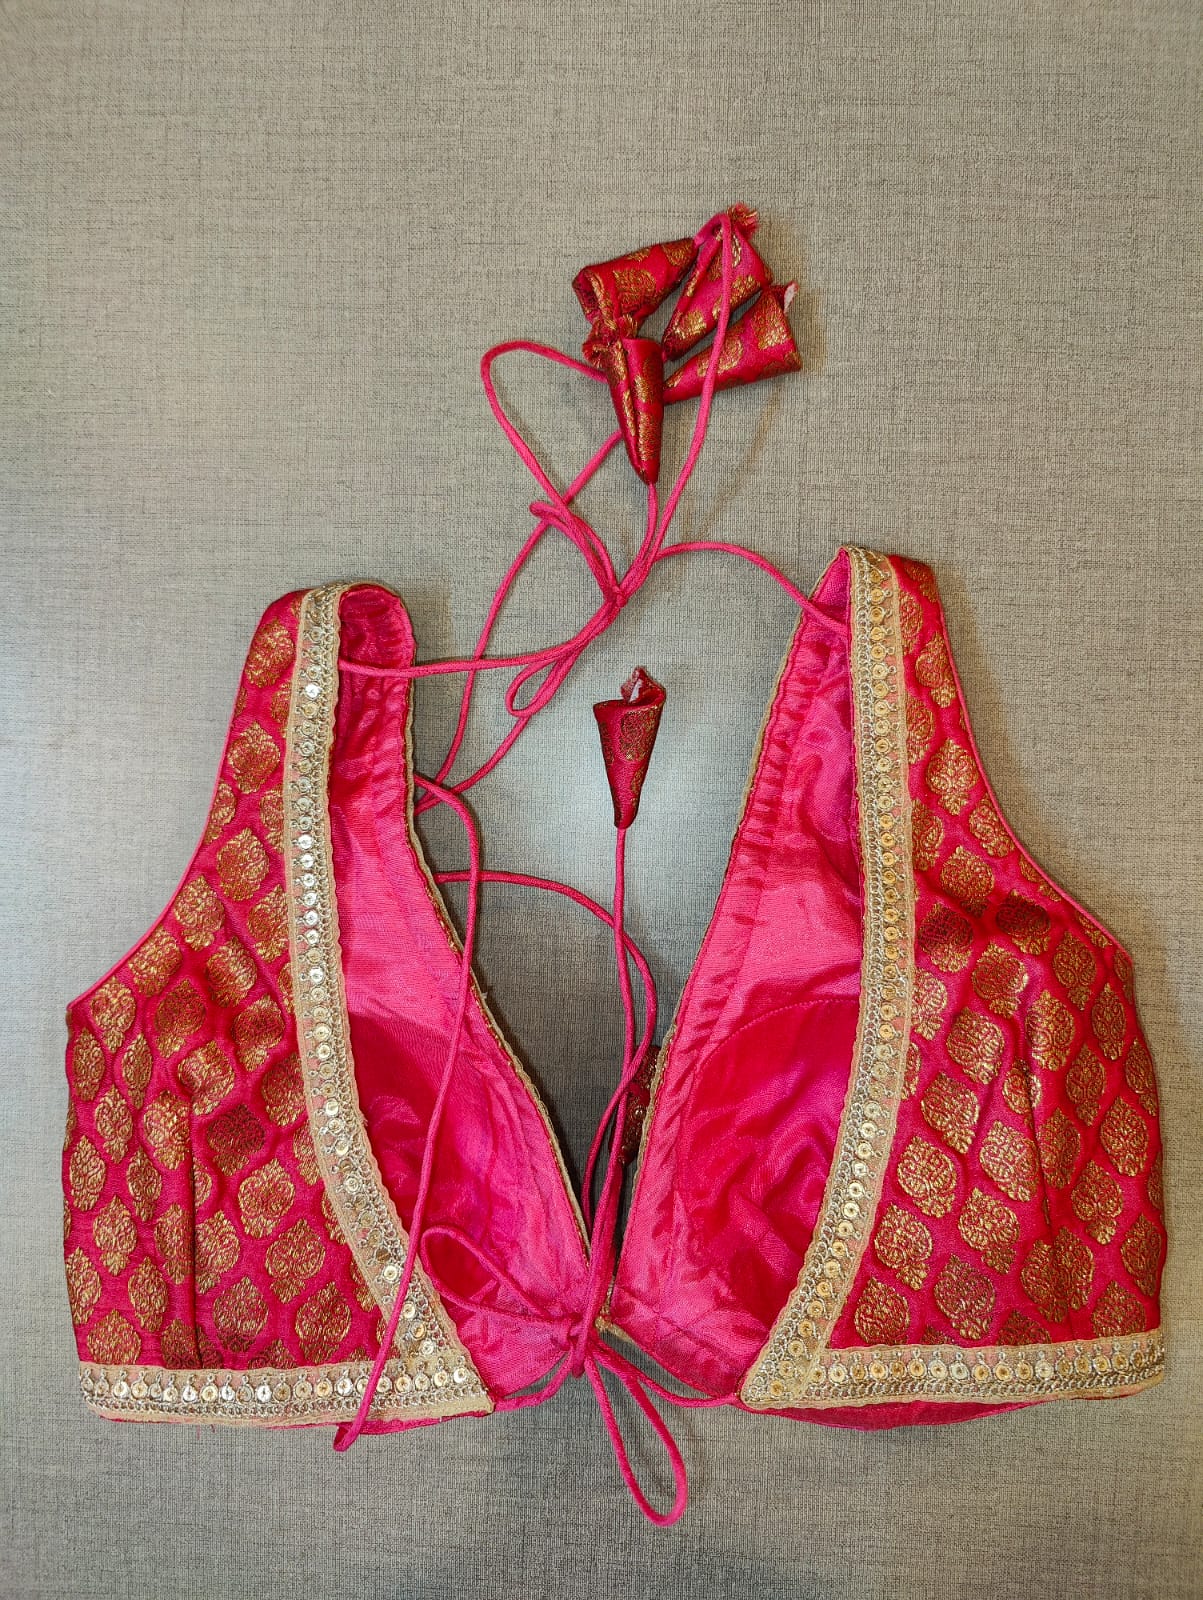 Shop beautiful pink Banarasi sheer saree blouse online in USA. Elevate your Indian saree style with exquisite readymade sari blouse, embroidered saree blouses, Banarasi saree blouse, designer sari blouse, choli-cut blouses from Pure Elegance Indian clothing store in USA.-back